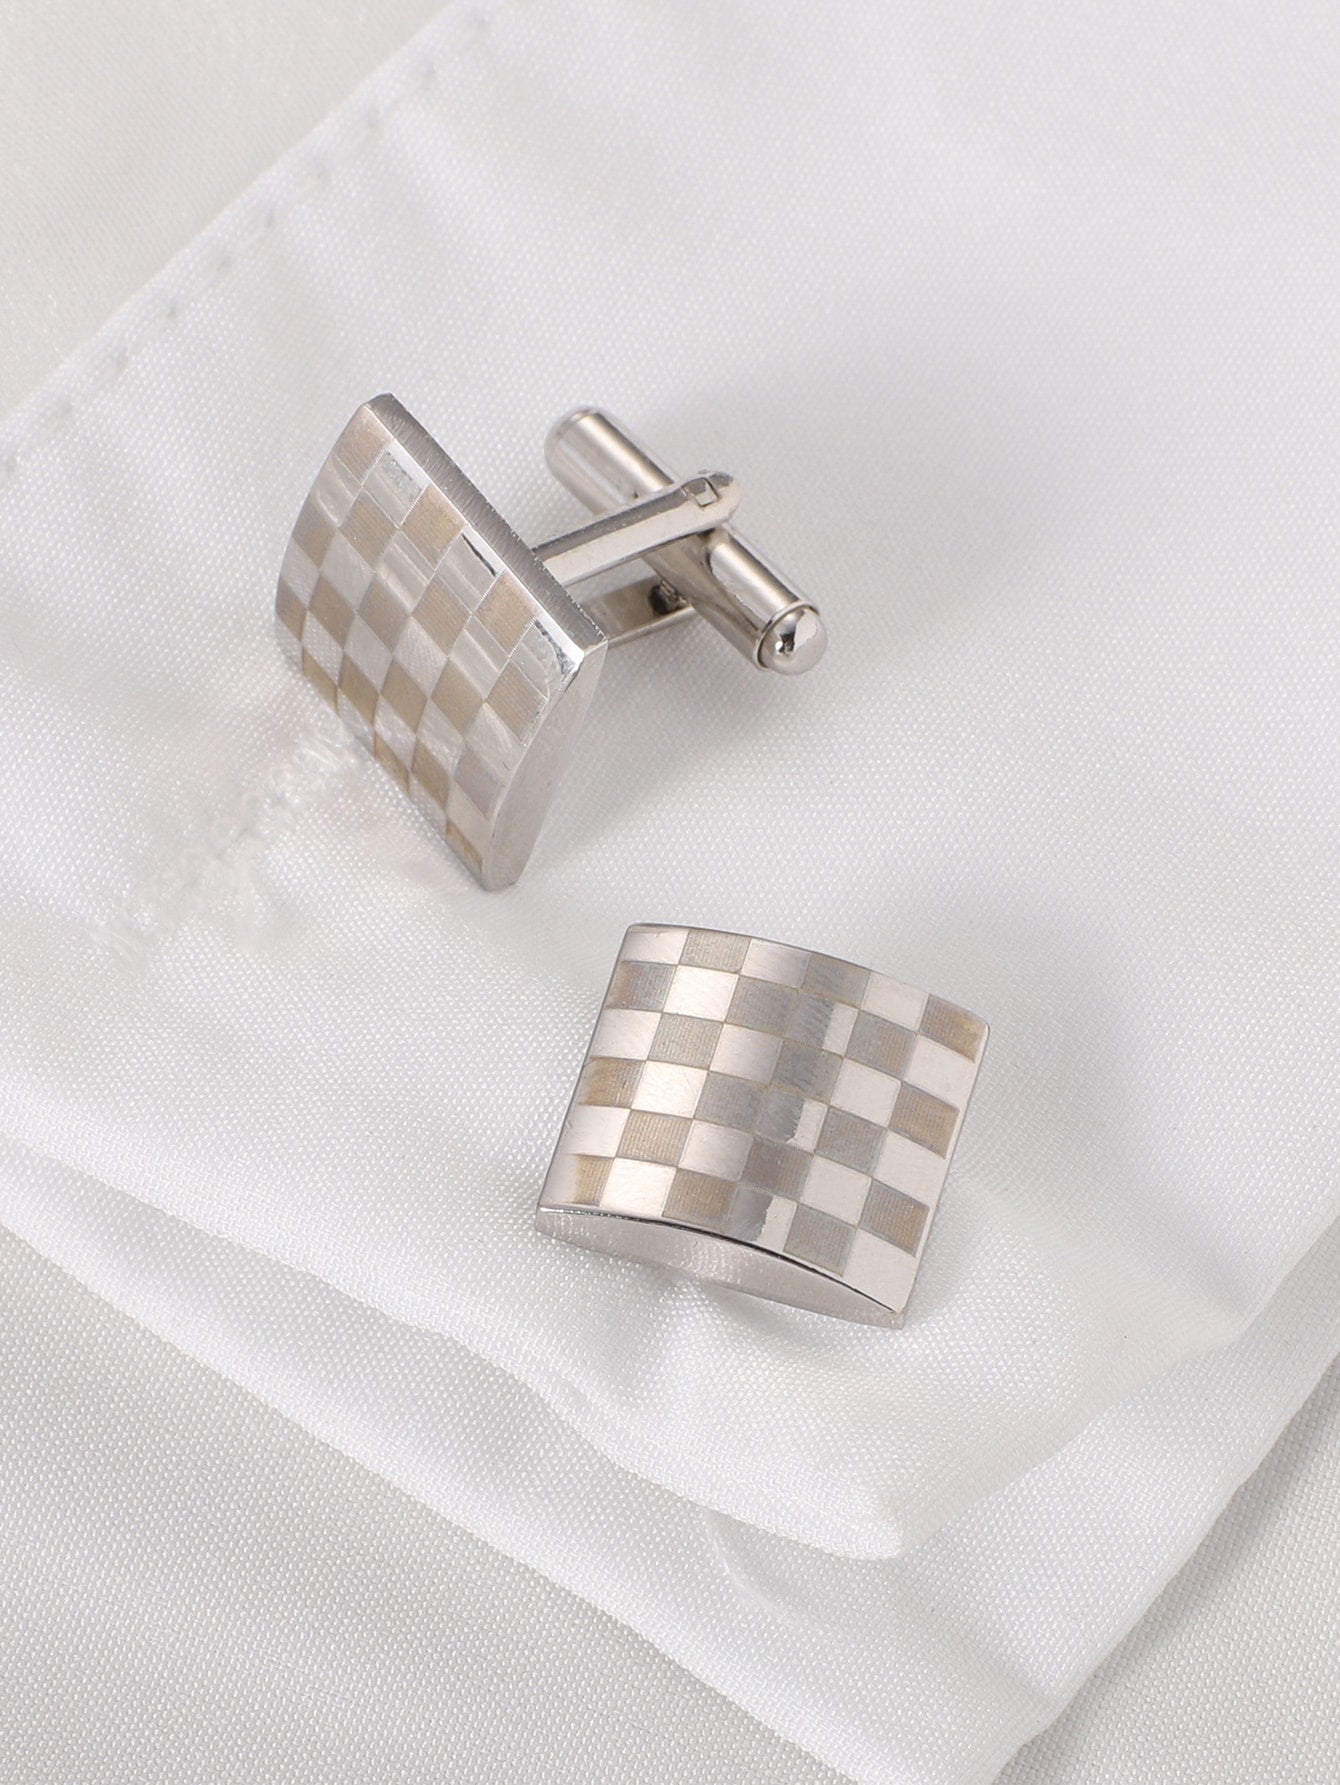 Fashionable and Popular 1pair Men Plaid Pattern Cufflinks, Stainless Steel Jewelry for Jewelry Gift and for a Stylish Look